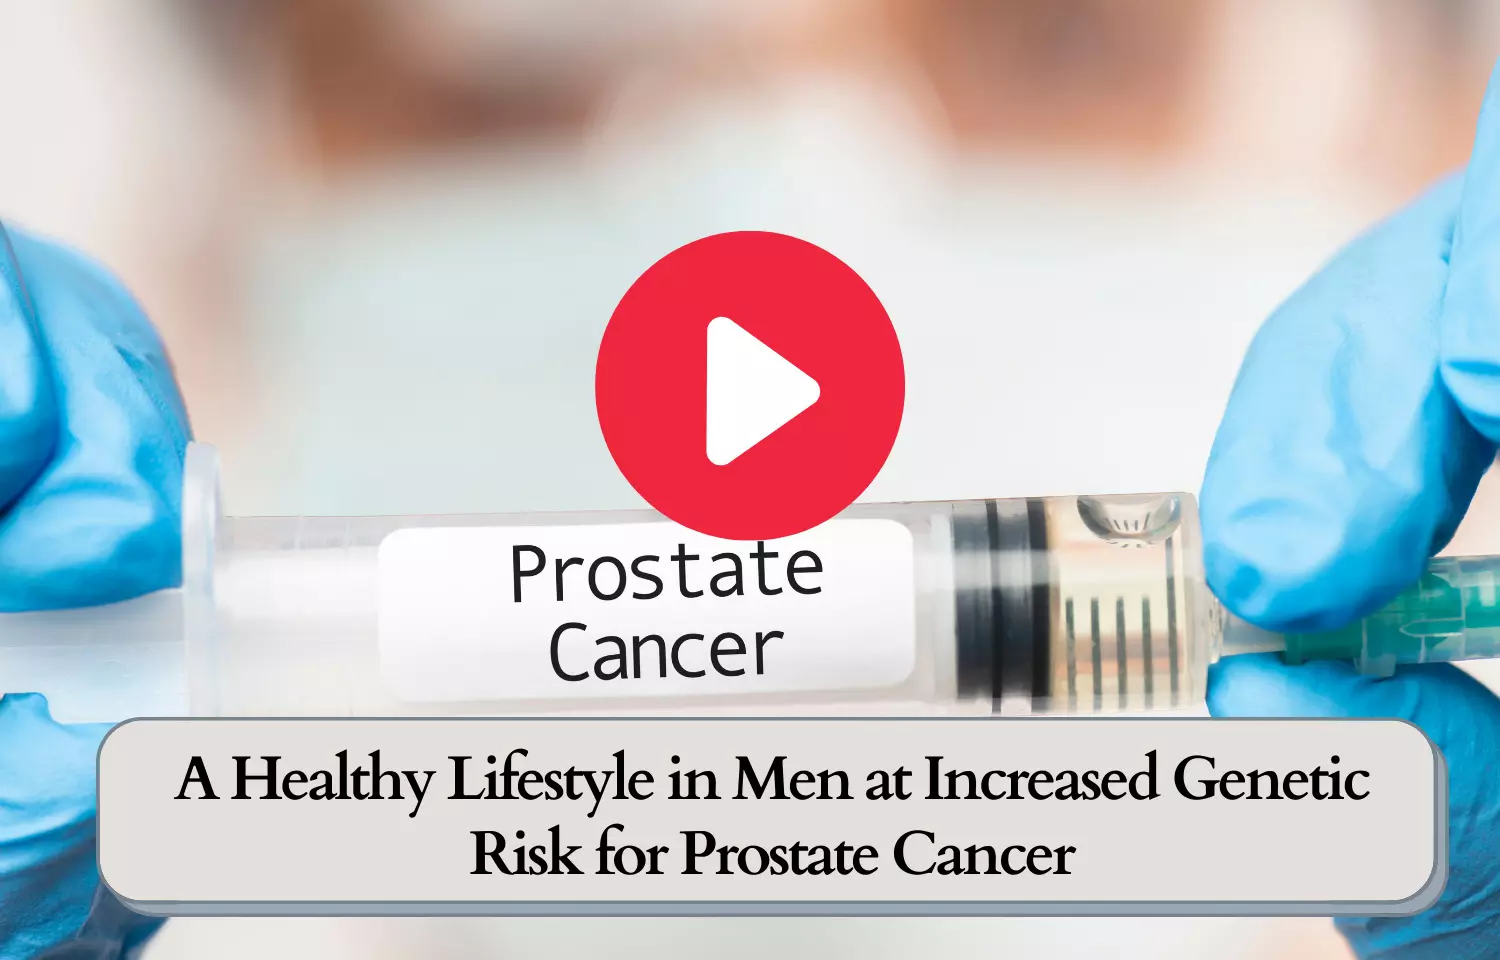 A Healthy Lifestyle in Men at Increased Genetic Risk for Prostate Cancer